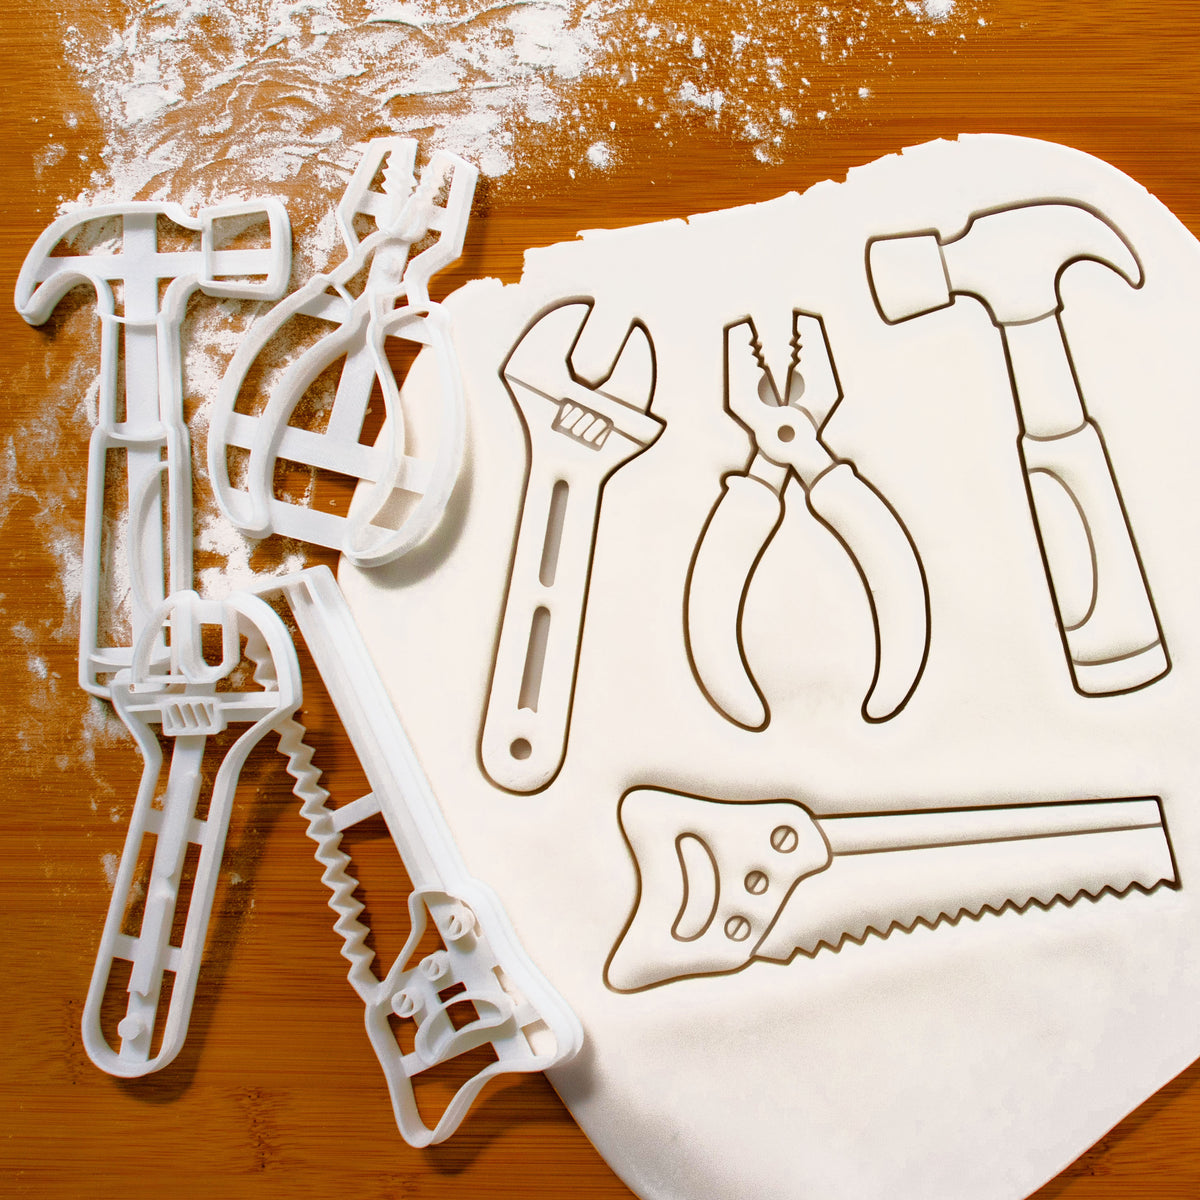 set of 4 hand tools cookie cutters, featuring a hammer, a hand saw, a wrench and a pair of pliers